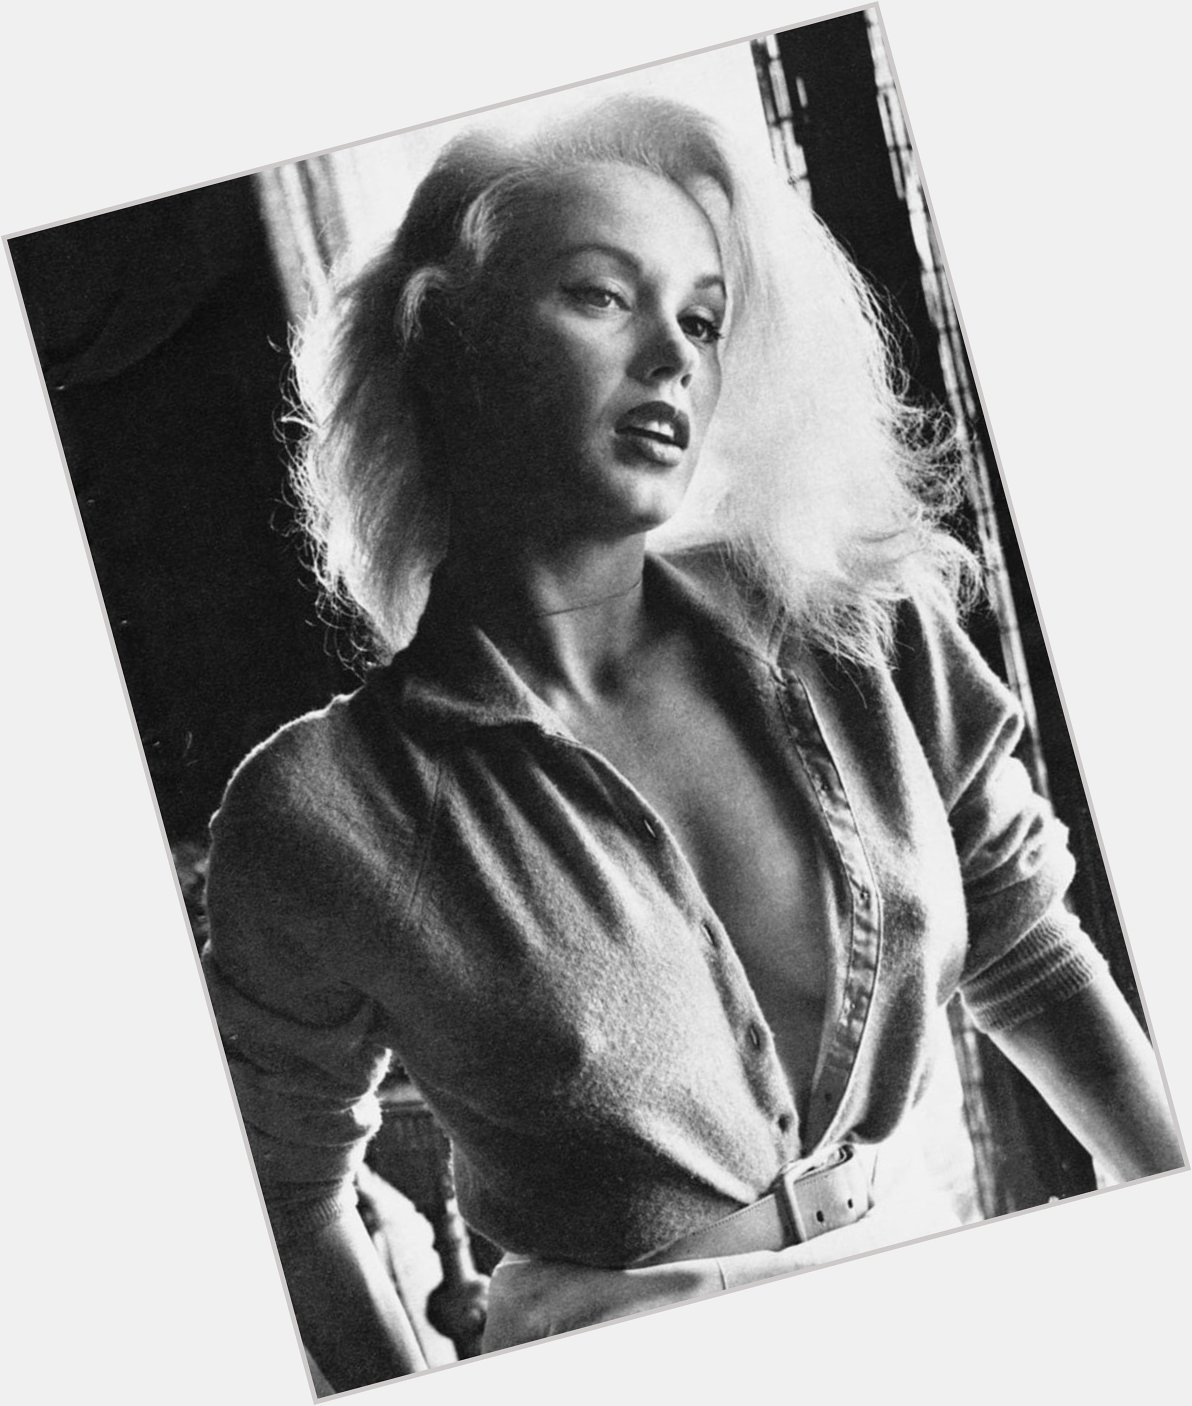 Happy Birthday to one of the sexiest women alive, Mamie Van Doren! 90 years old and she still looks hot! 